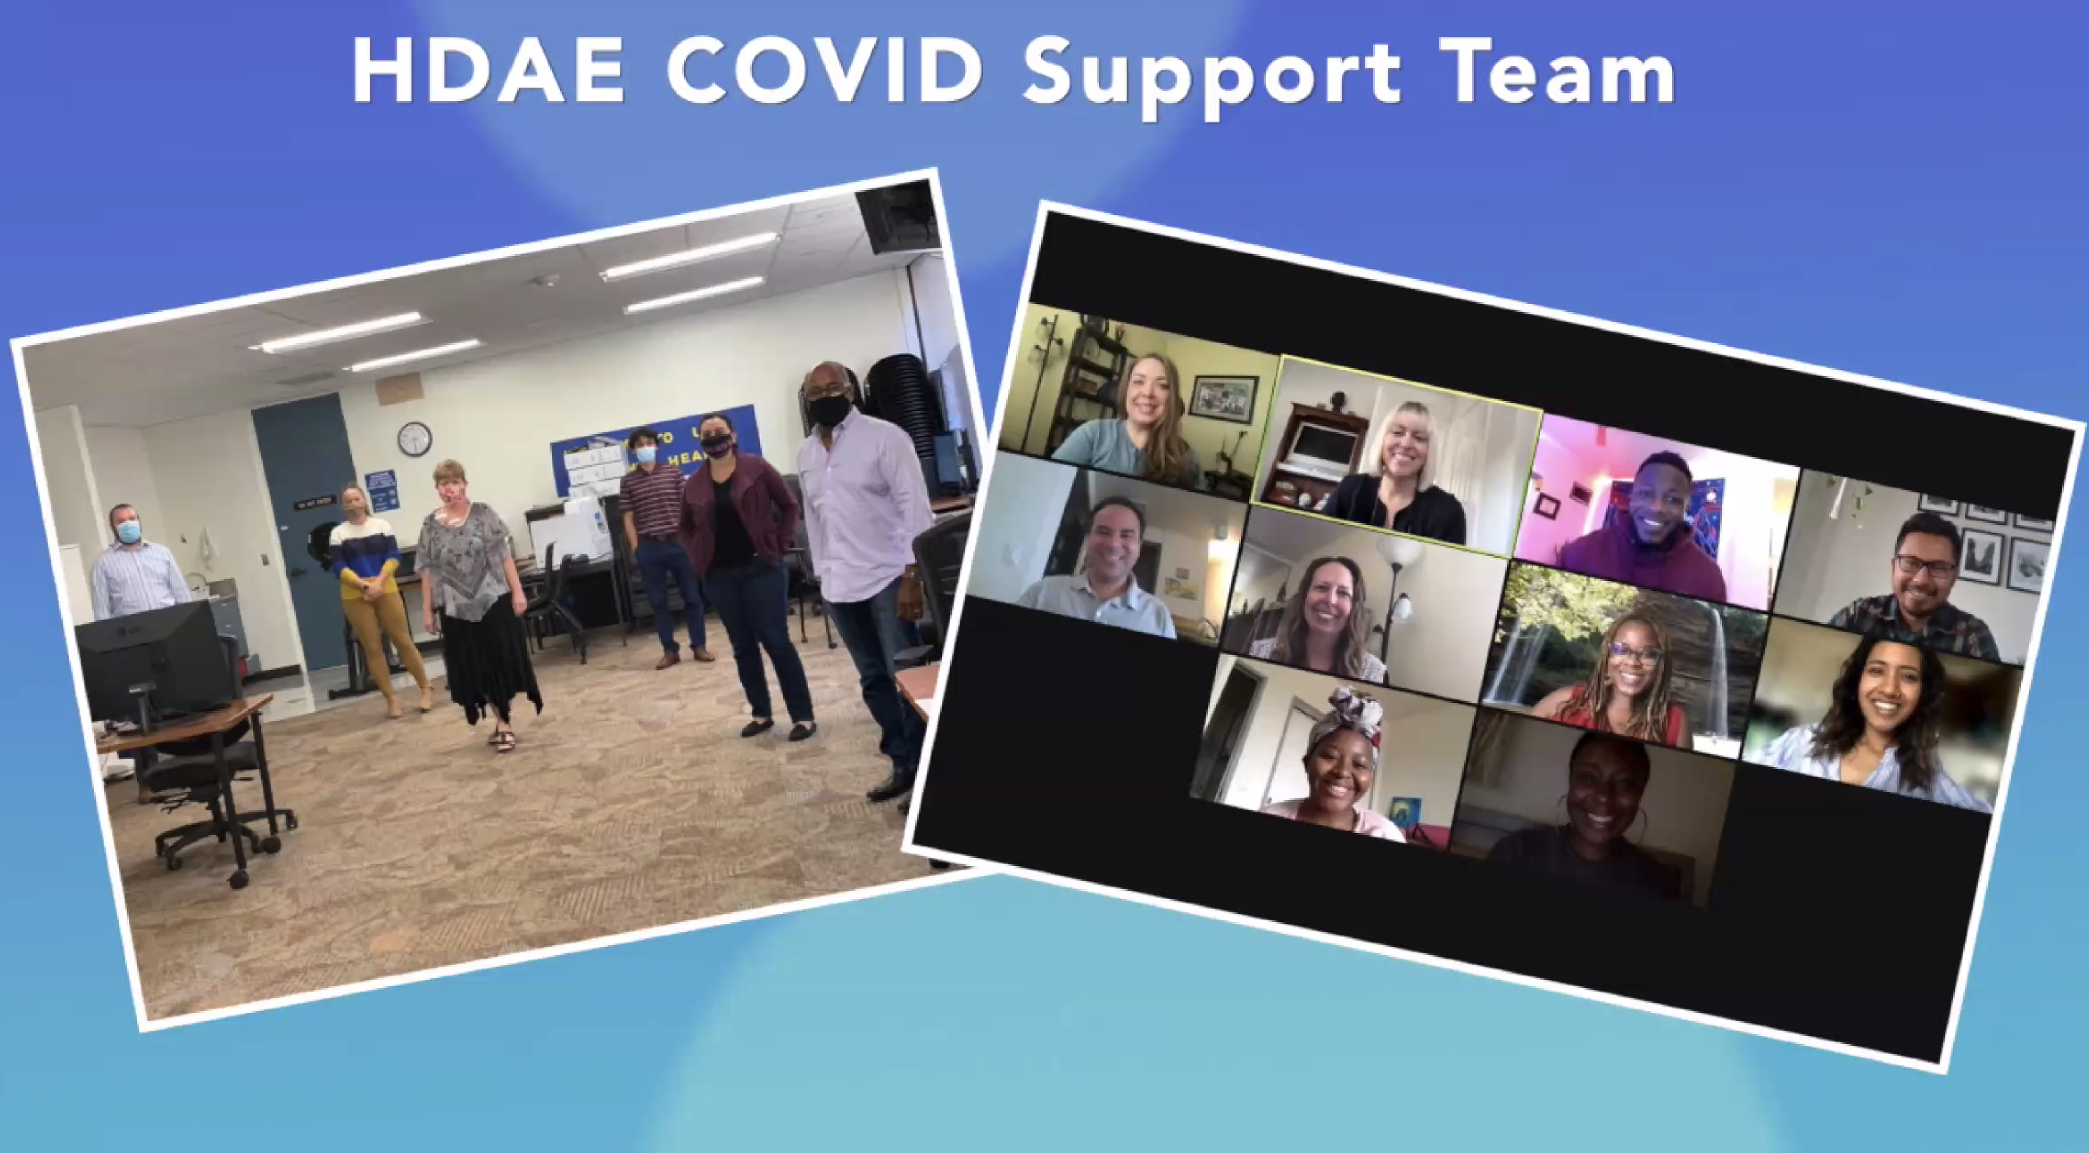 Covid Support team in action